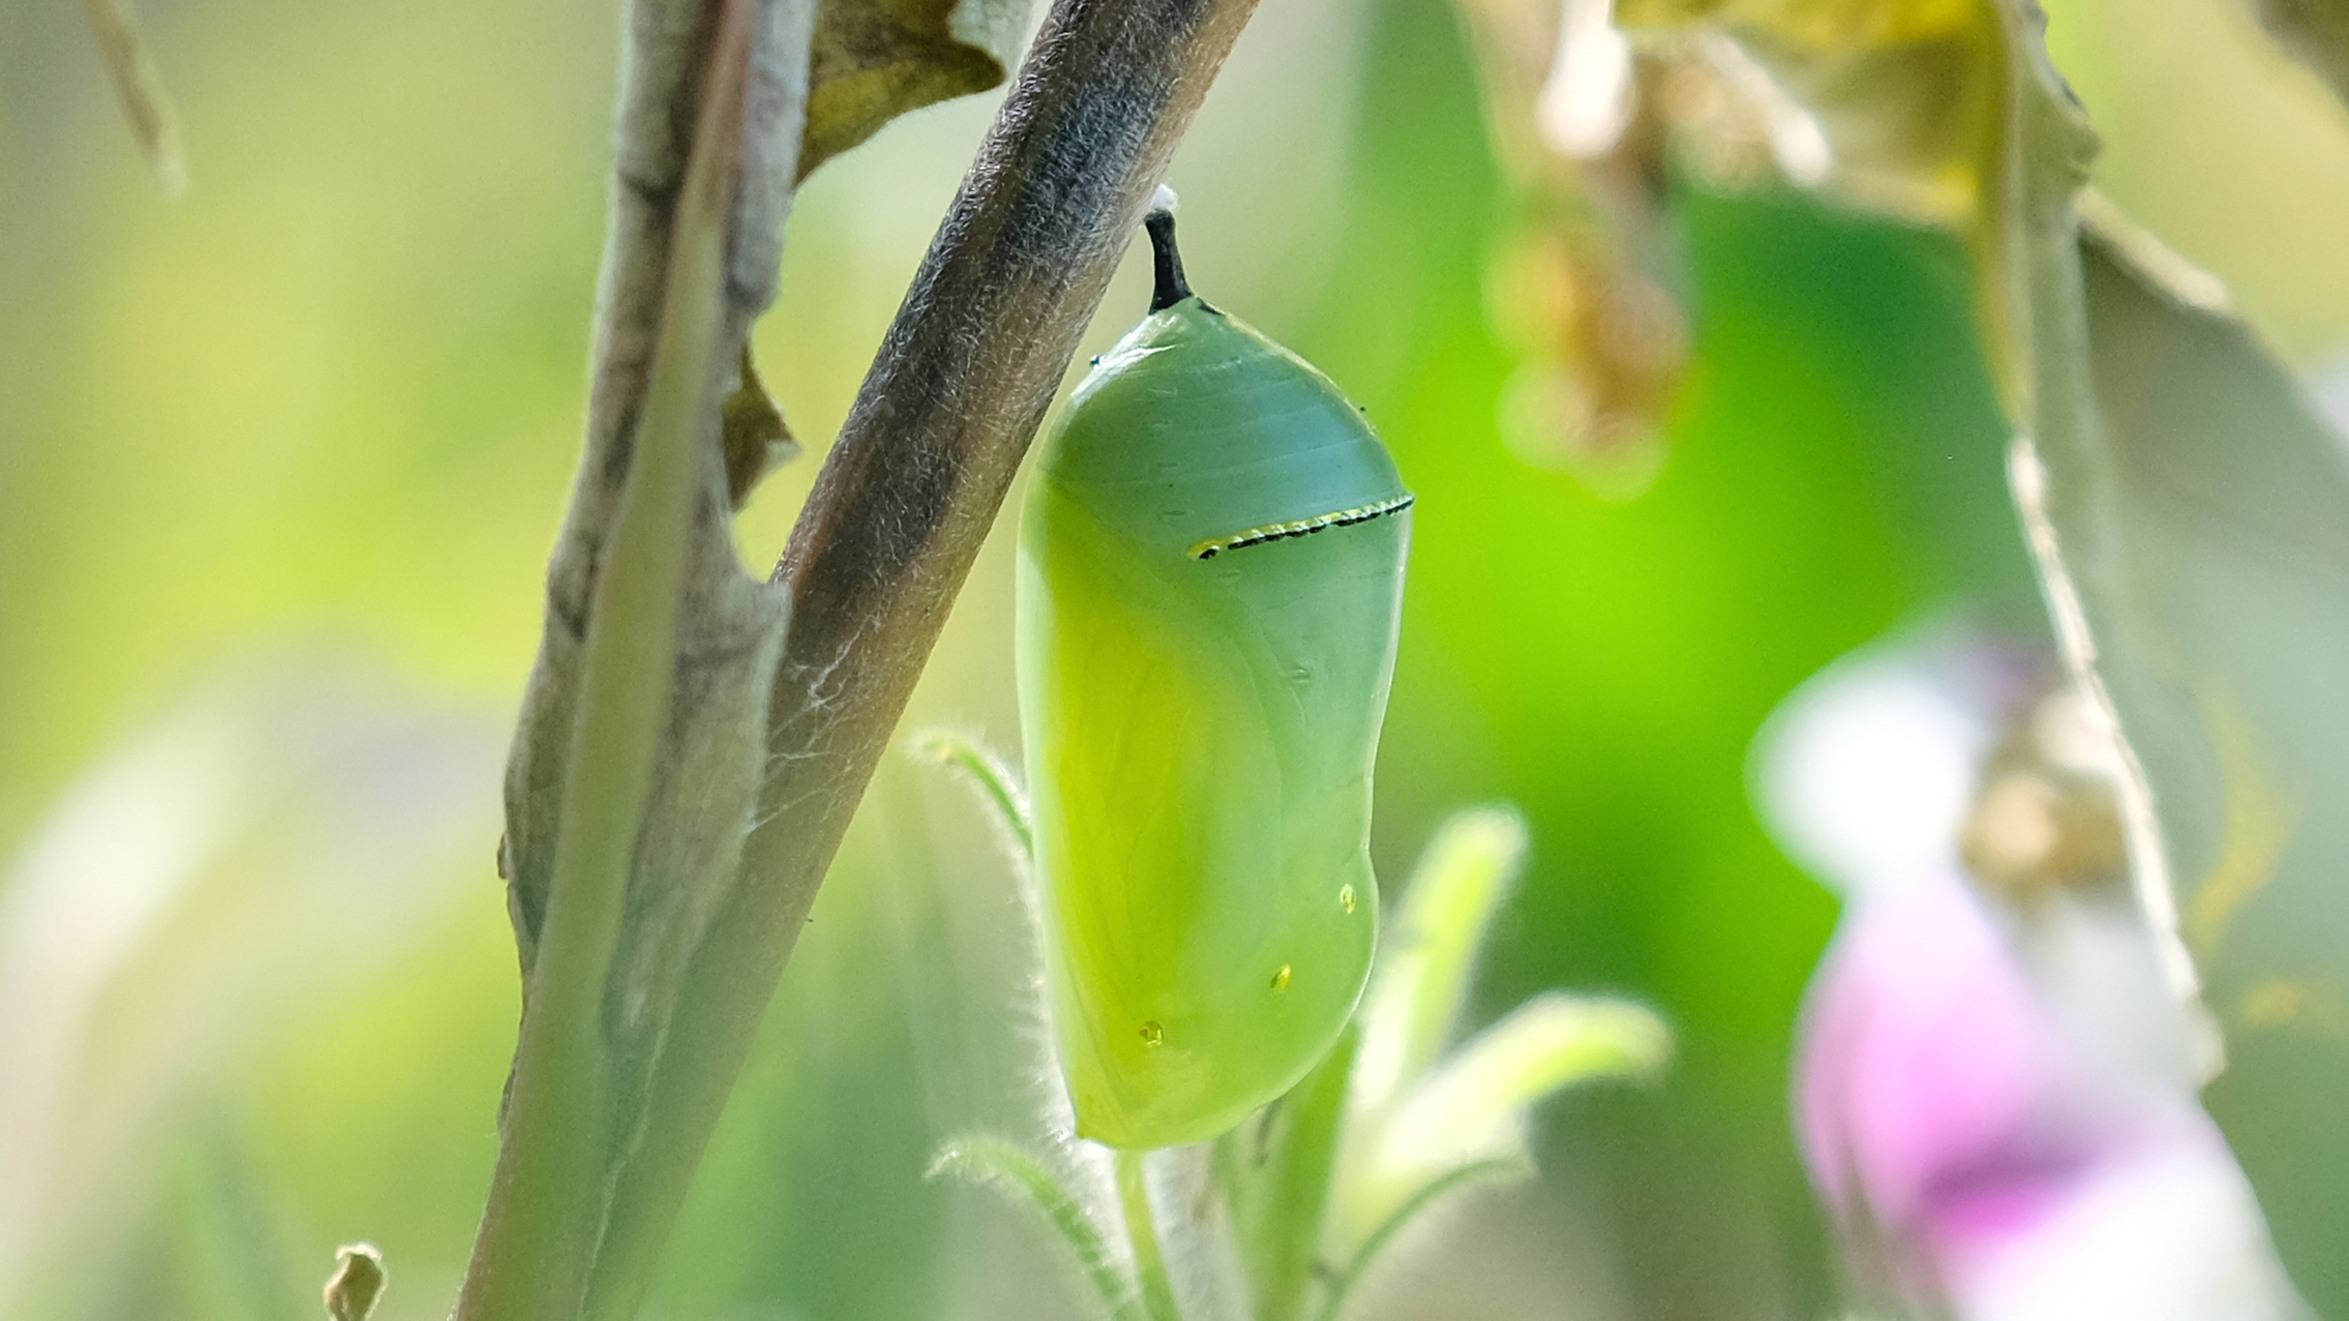 Monarch Life Stages - Chrysalis. Courtesy of Kim Smith.